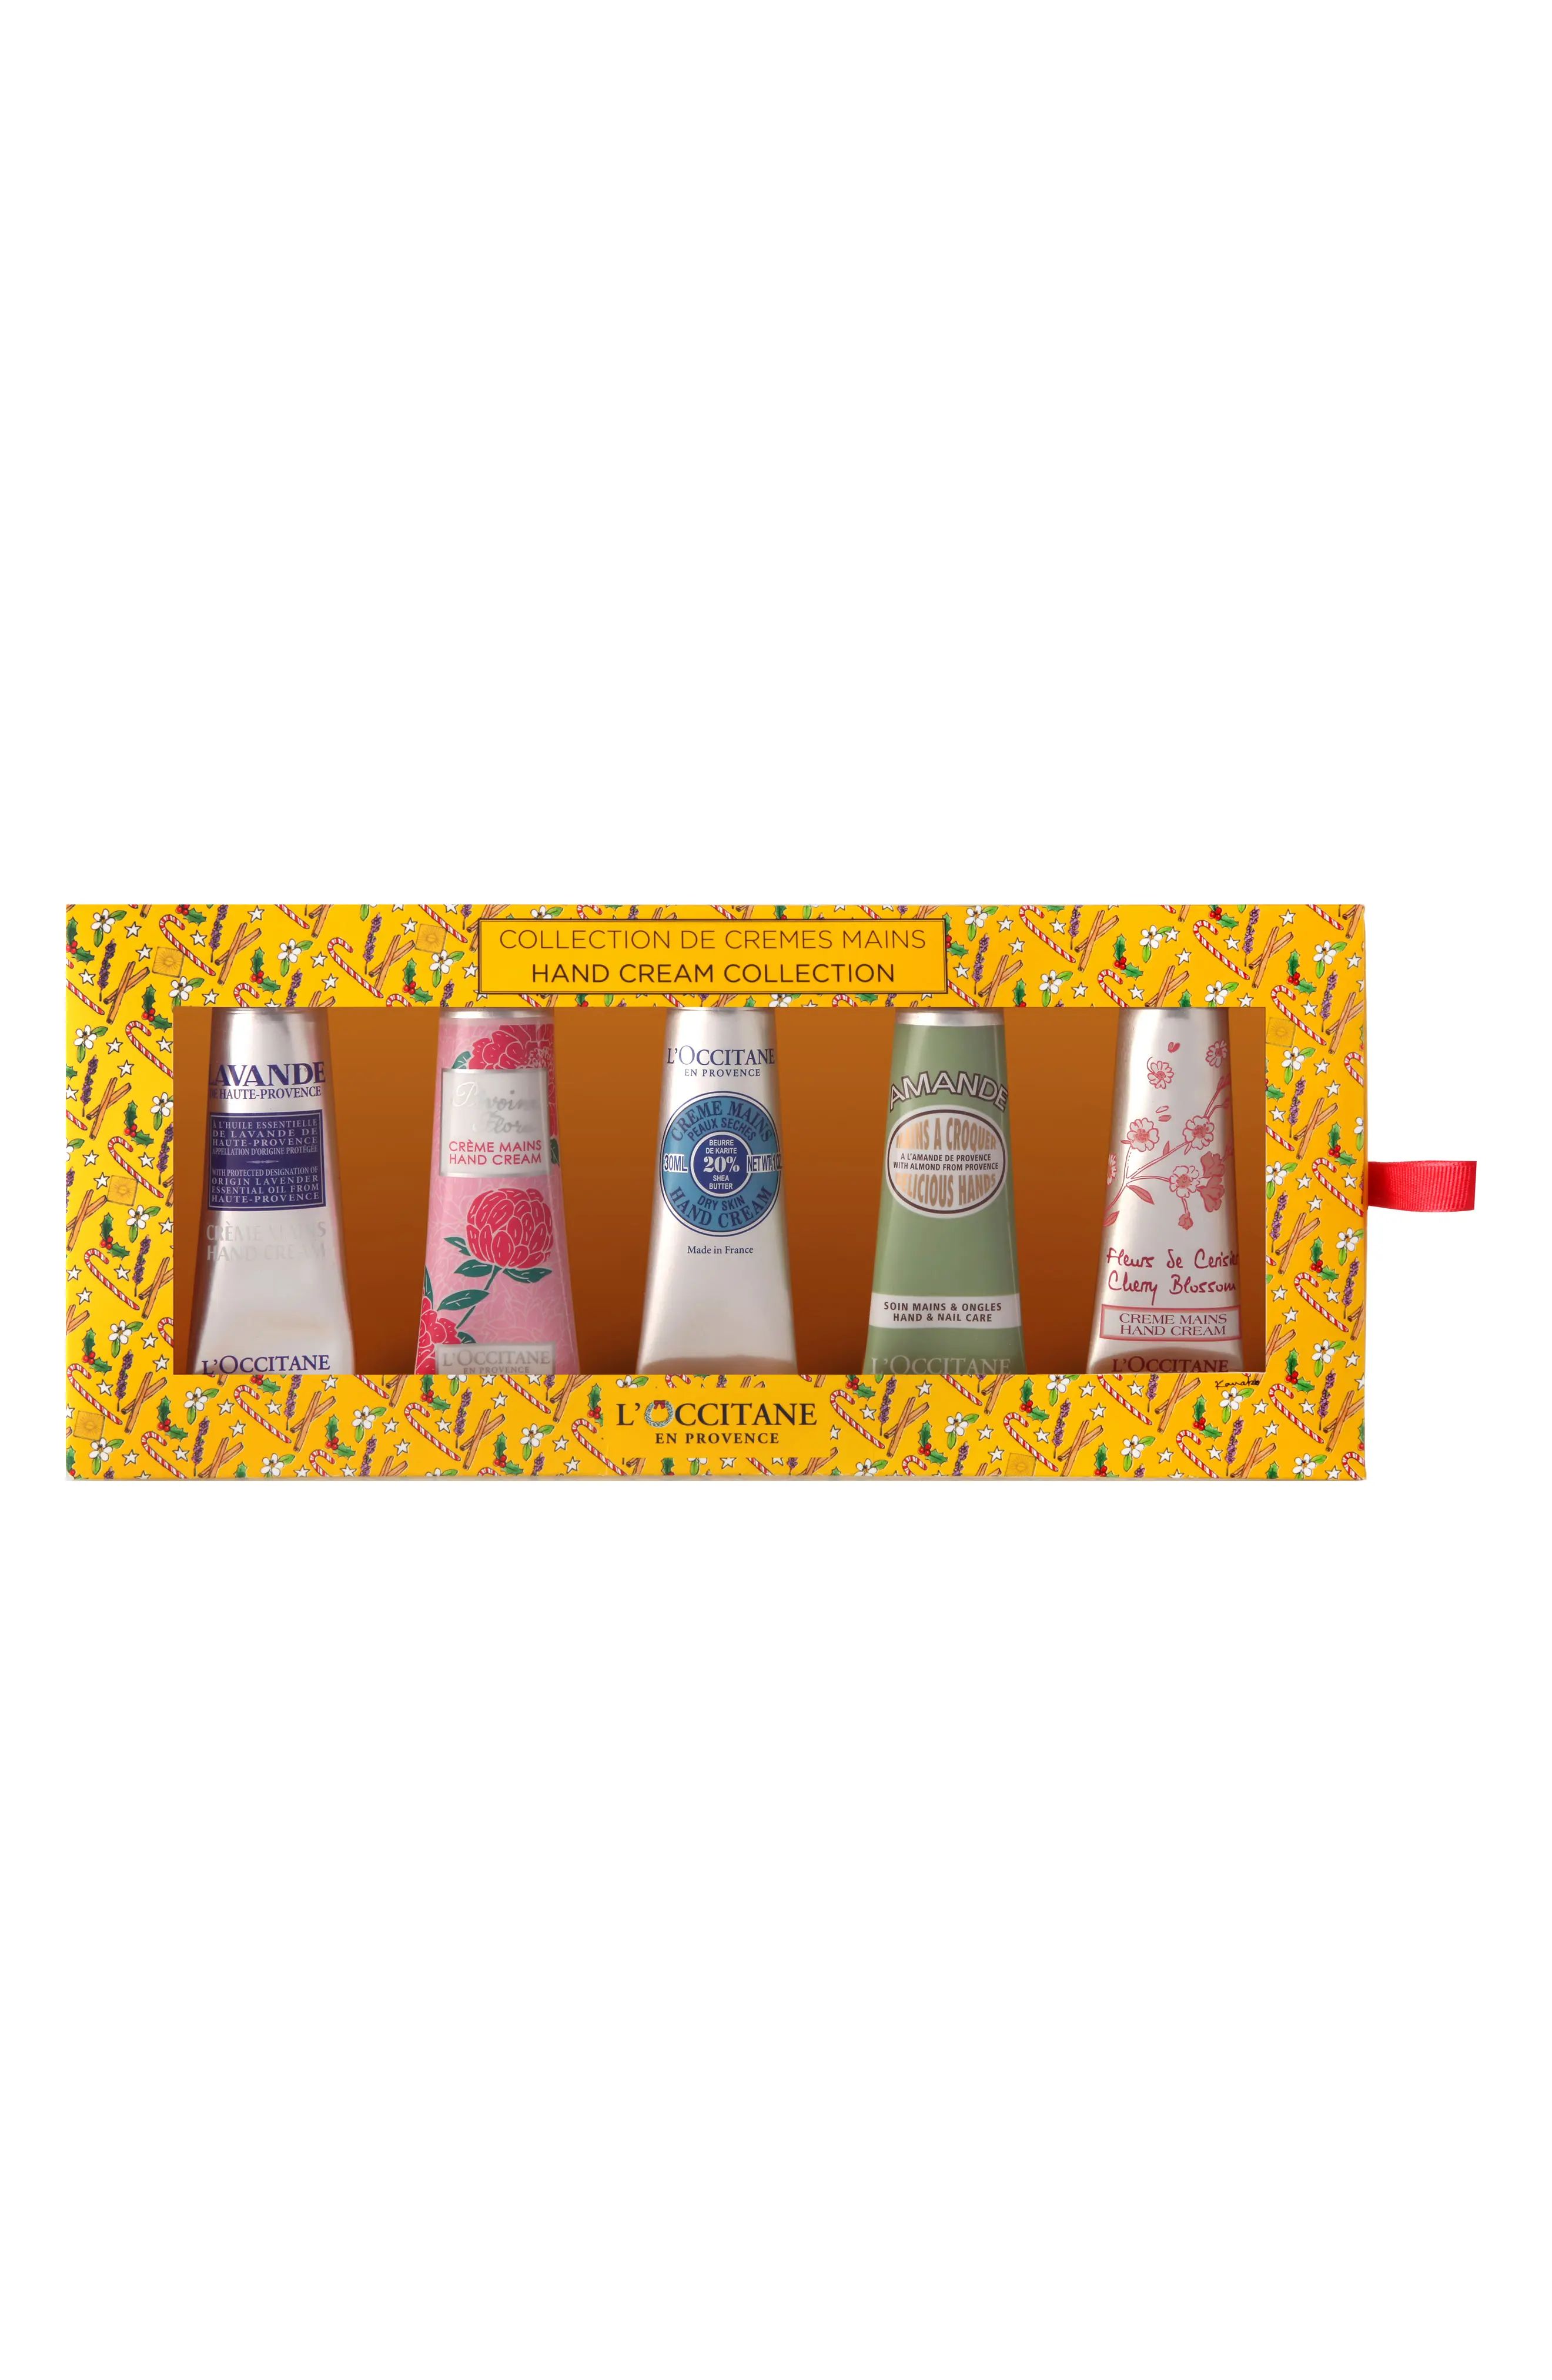 Hand Cream Collection | Nordstrom